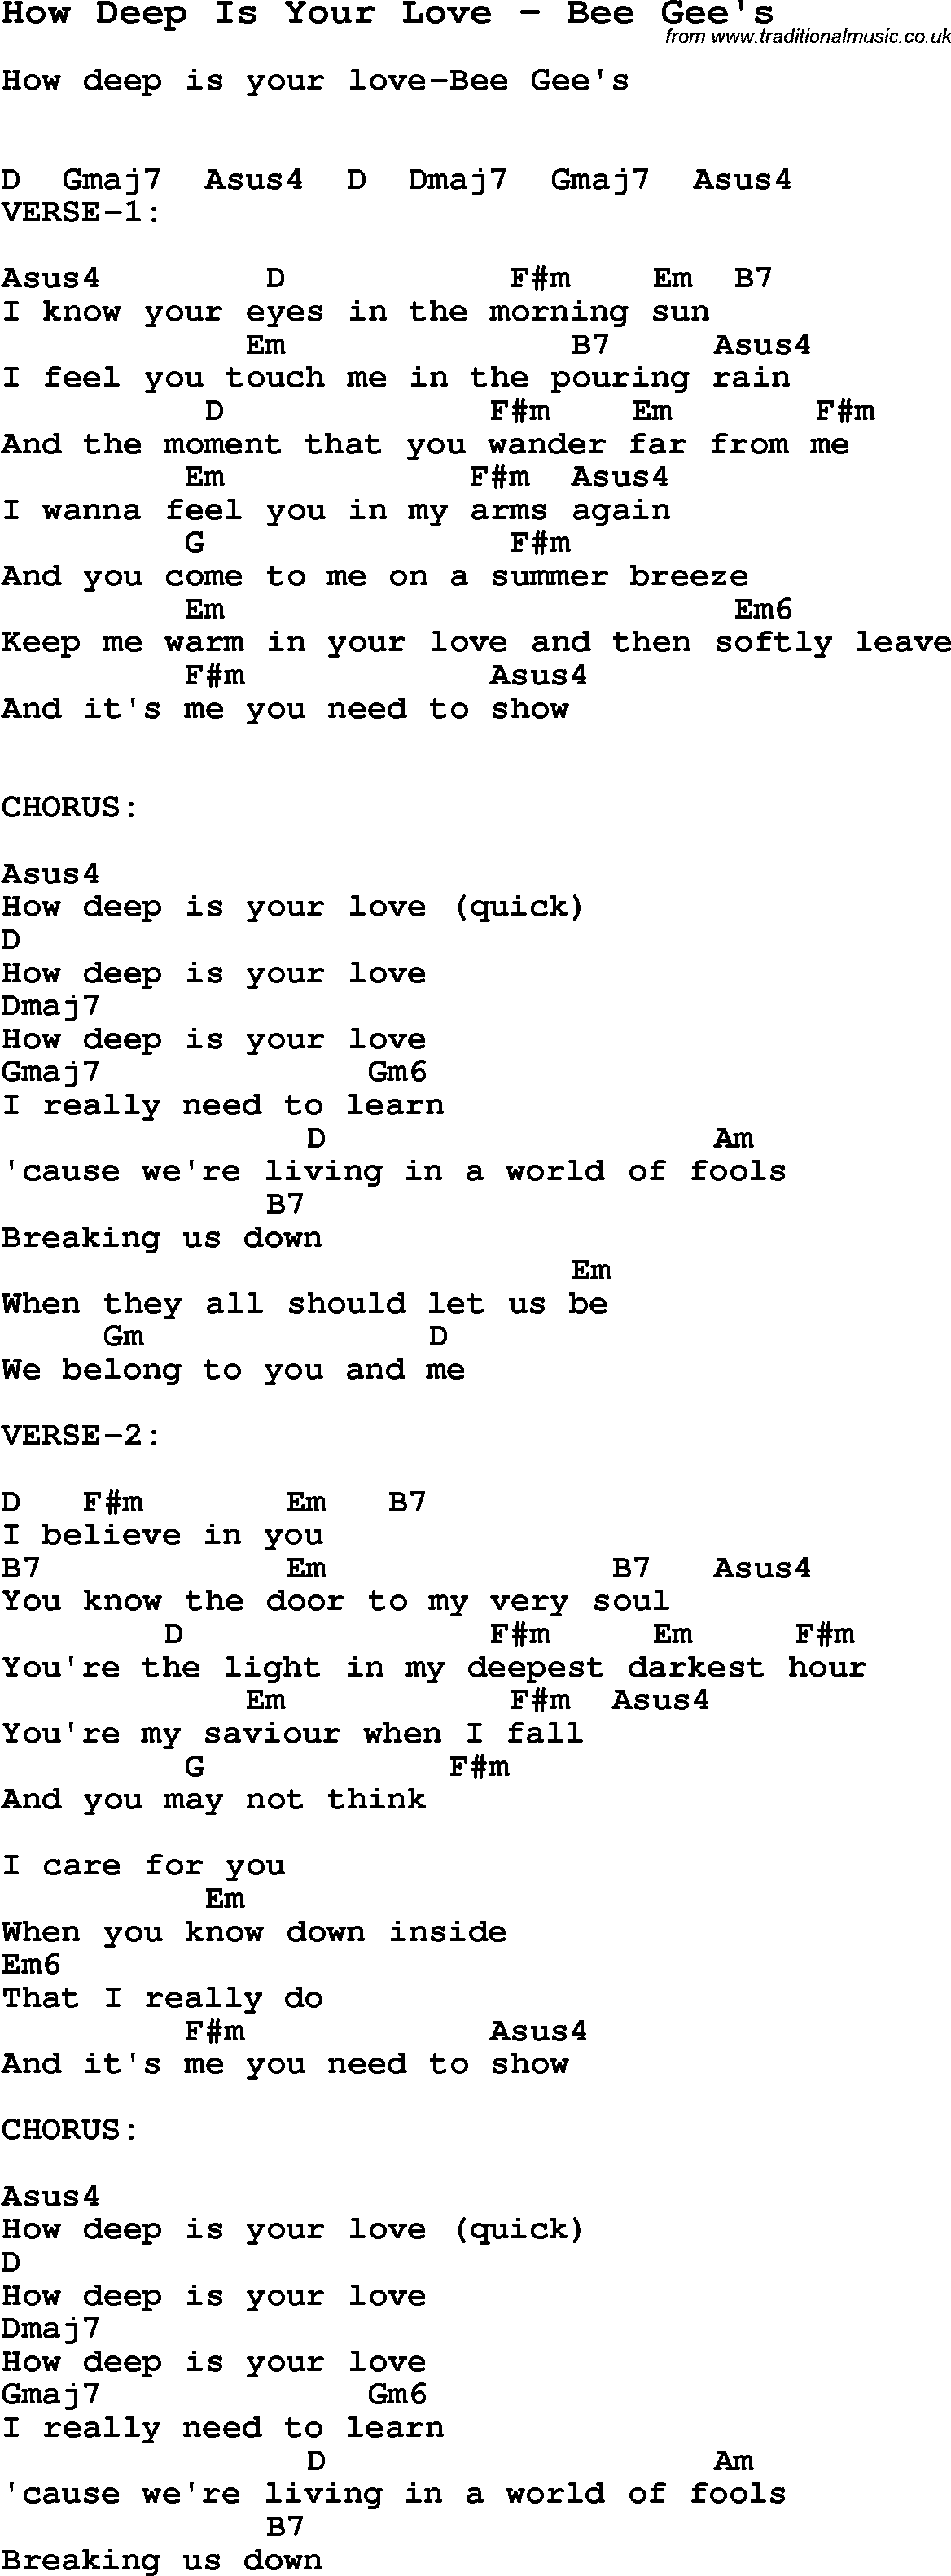 Song How Deep Is Your Love by Bee Gee's, with lyrics for vocal performance and accompaniment chords for Ukulele, Guitar Banjo etc.